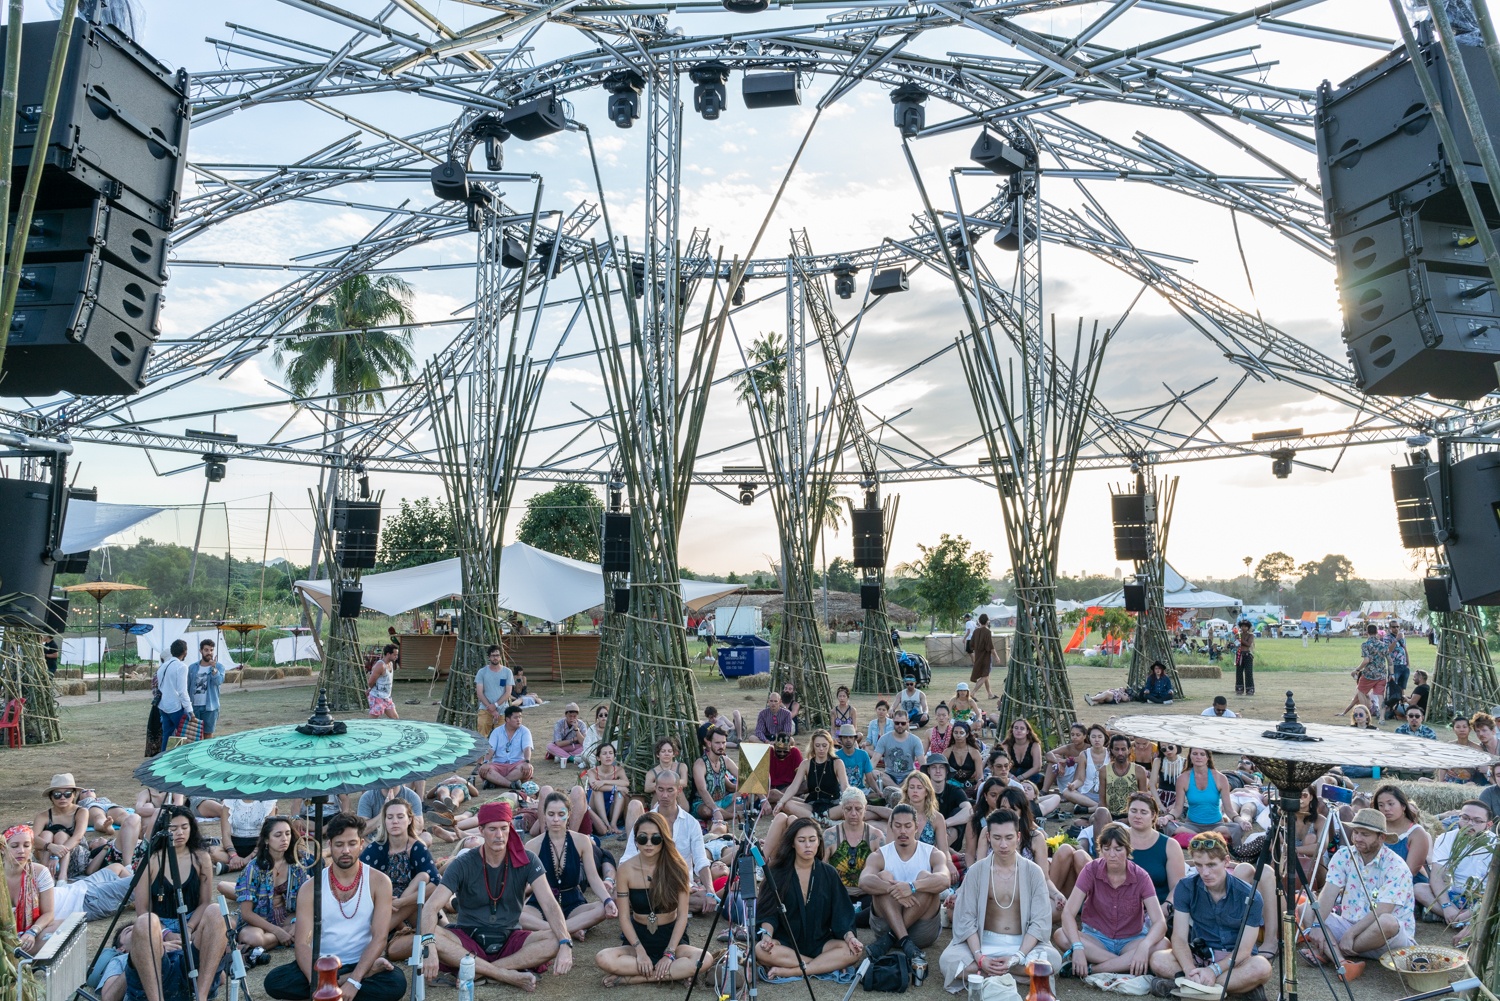 12 hangs of 3 Kara plus an SB18 were placed in a dodecahedron configuration facing the centre of the structure, with a 115XT HiQ below each hang to allow for nearfield coverage, Wonderfruit Festival 2018, The Fields of Siam Country Club, Pattaya, Thailand